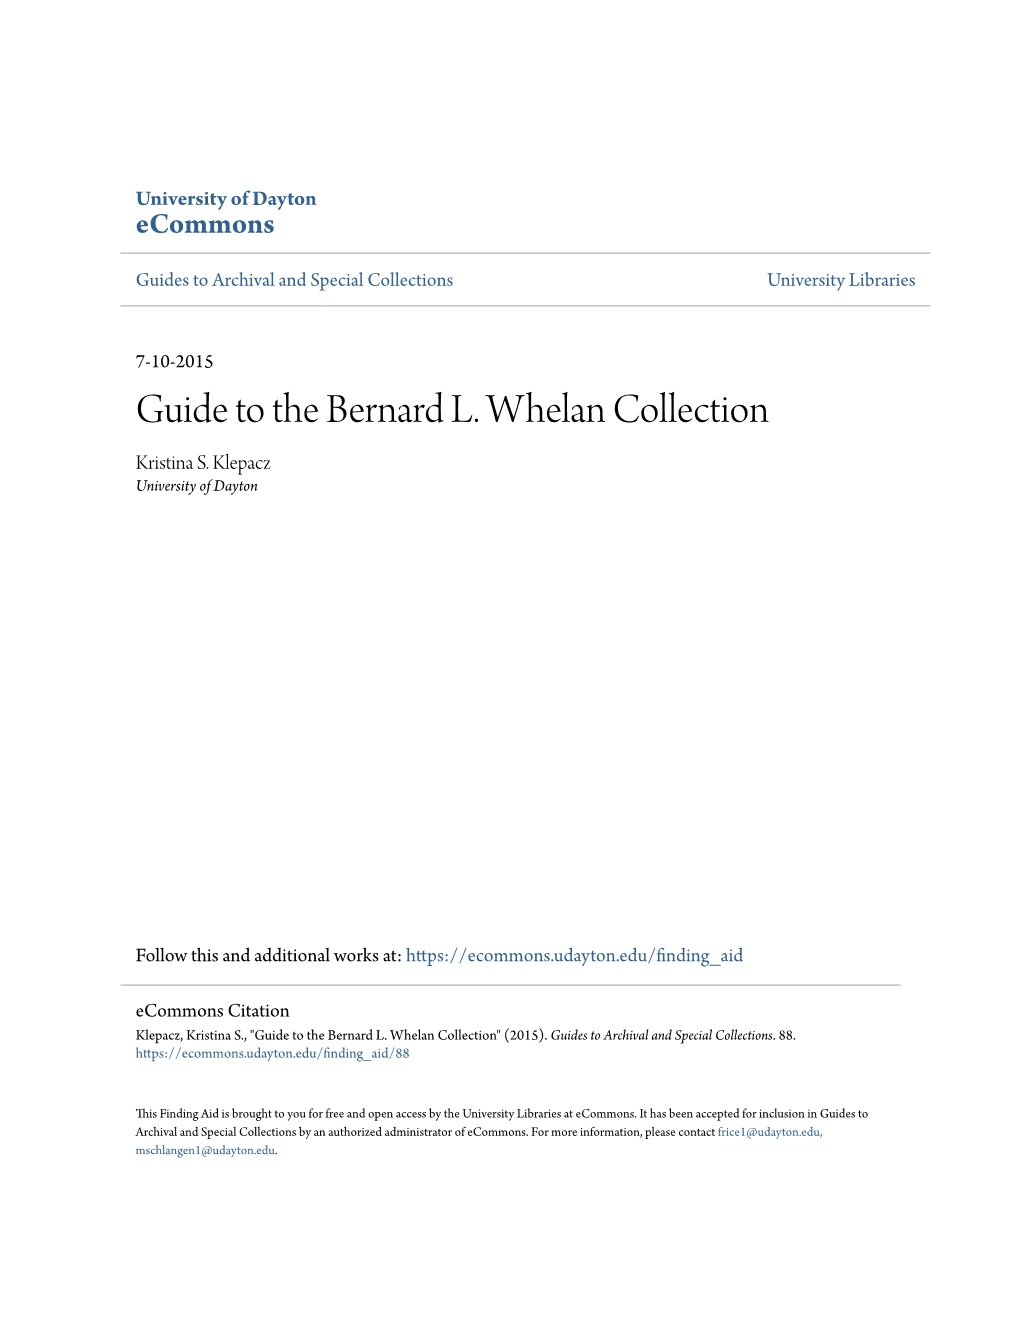 Guide to the Bernard L. Whelan Collection Kristina S